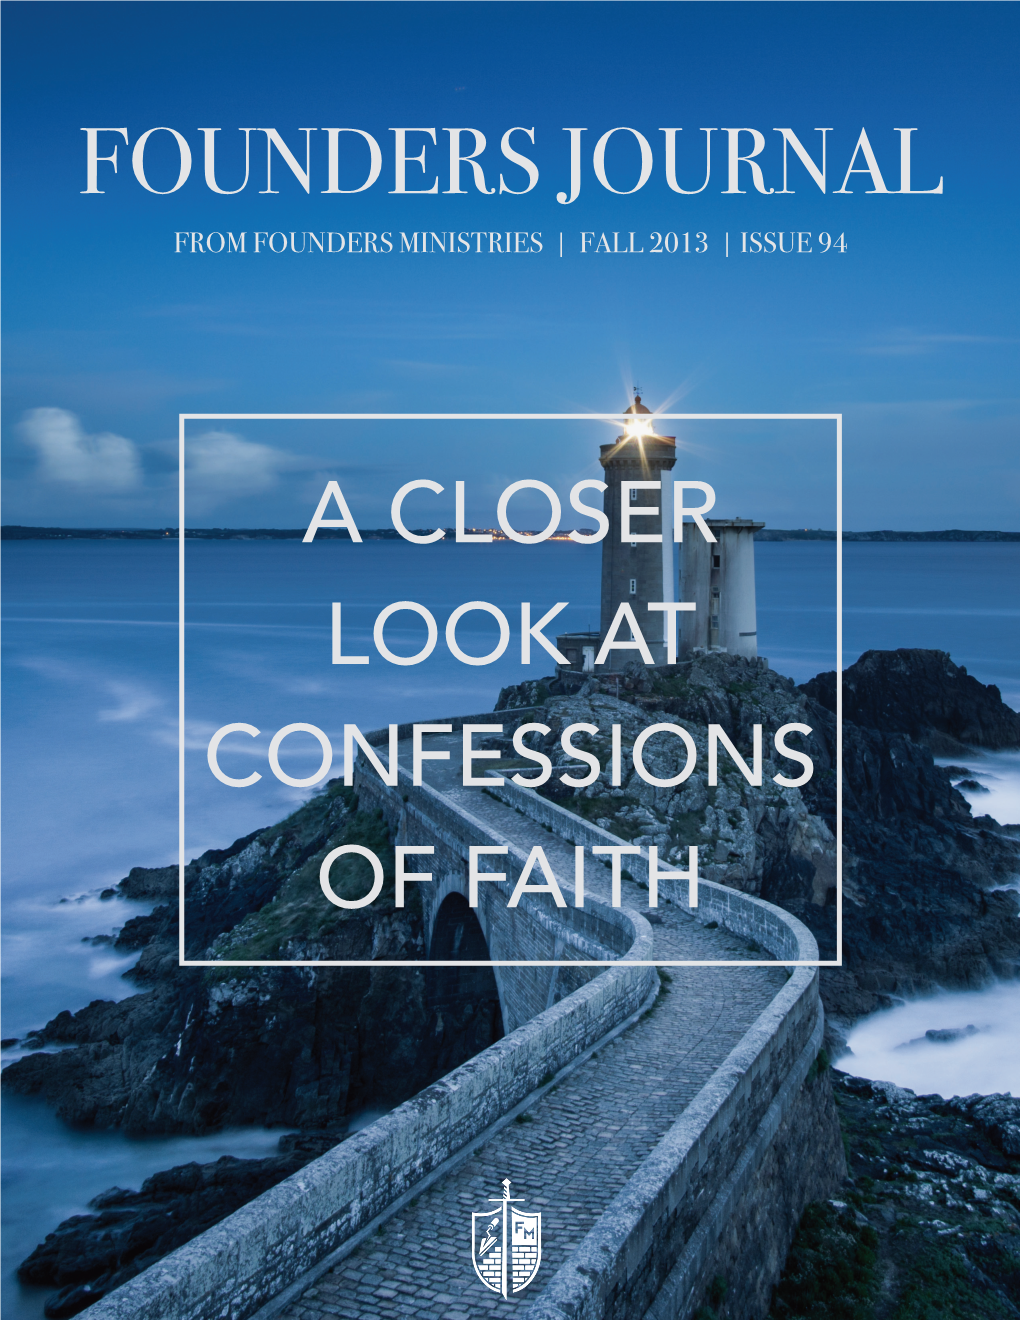 Founders Journal from Founders Ministries | Fall 2013 | Issue 94